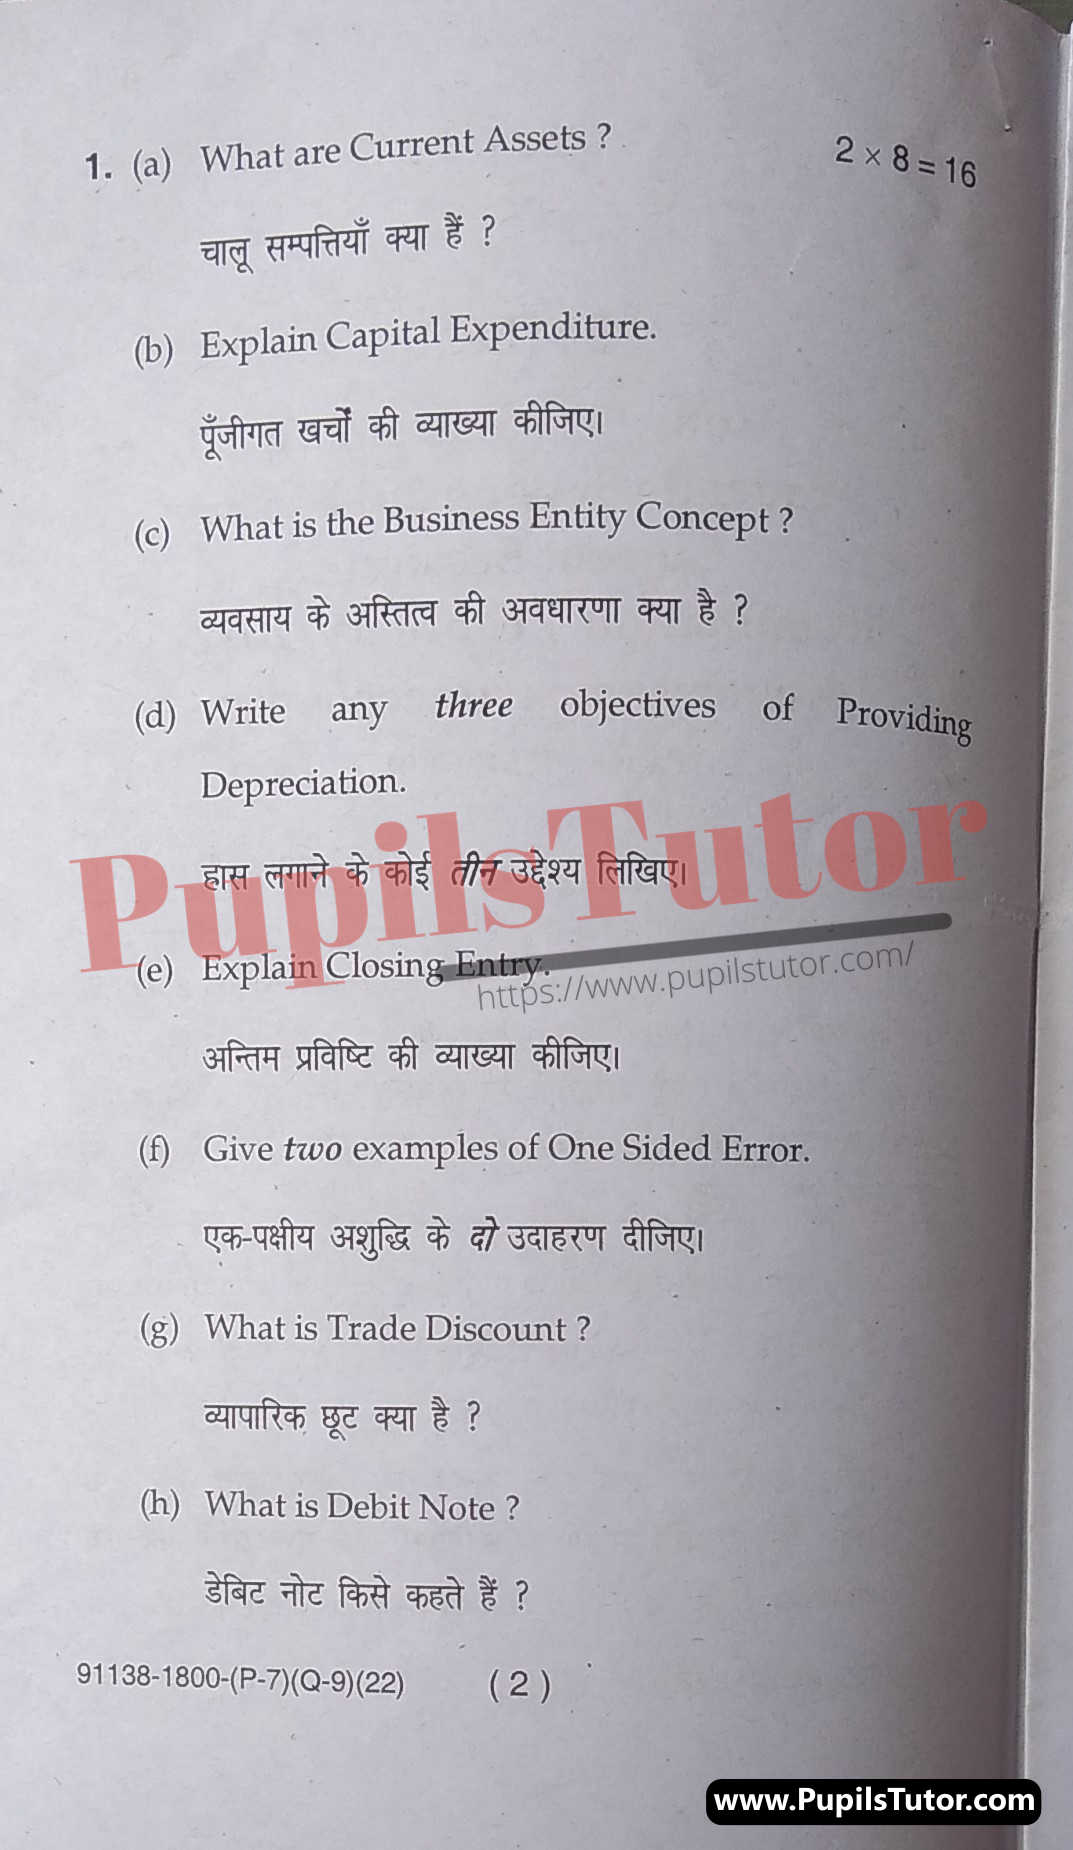 M.D. University B.Com. An Introduction To Accounting First Semester Important Question Answer And Solution - www.pupilstutor.com (Paper Page Number 2)